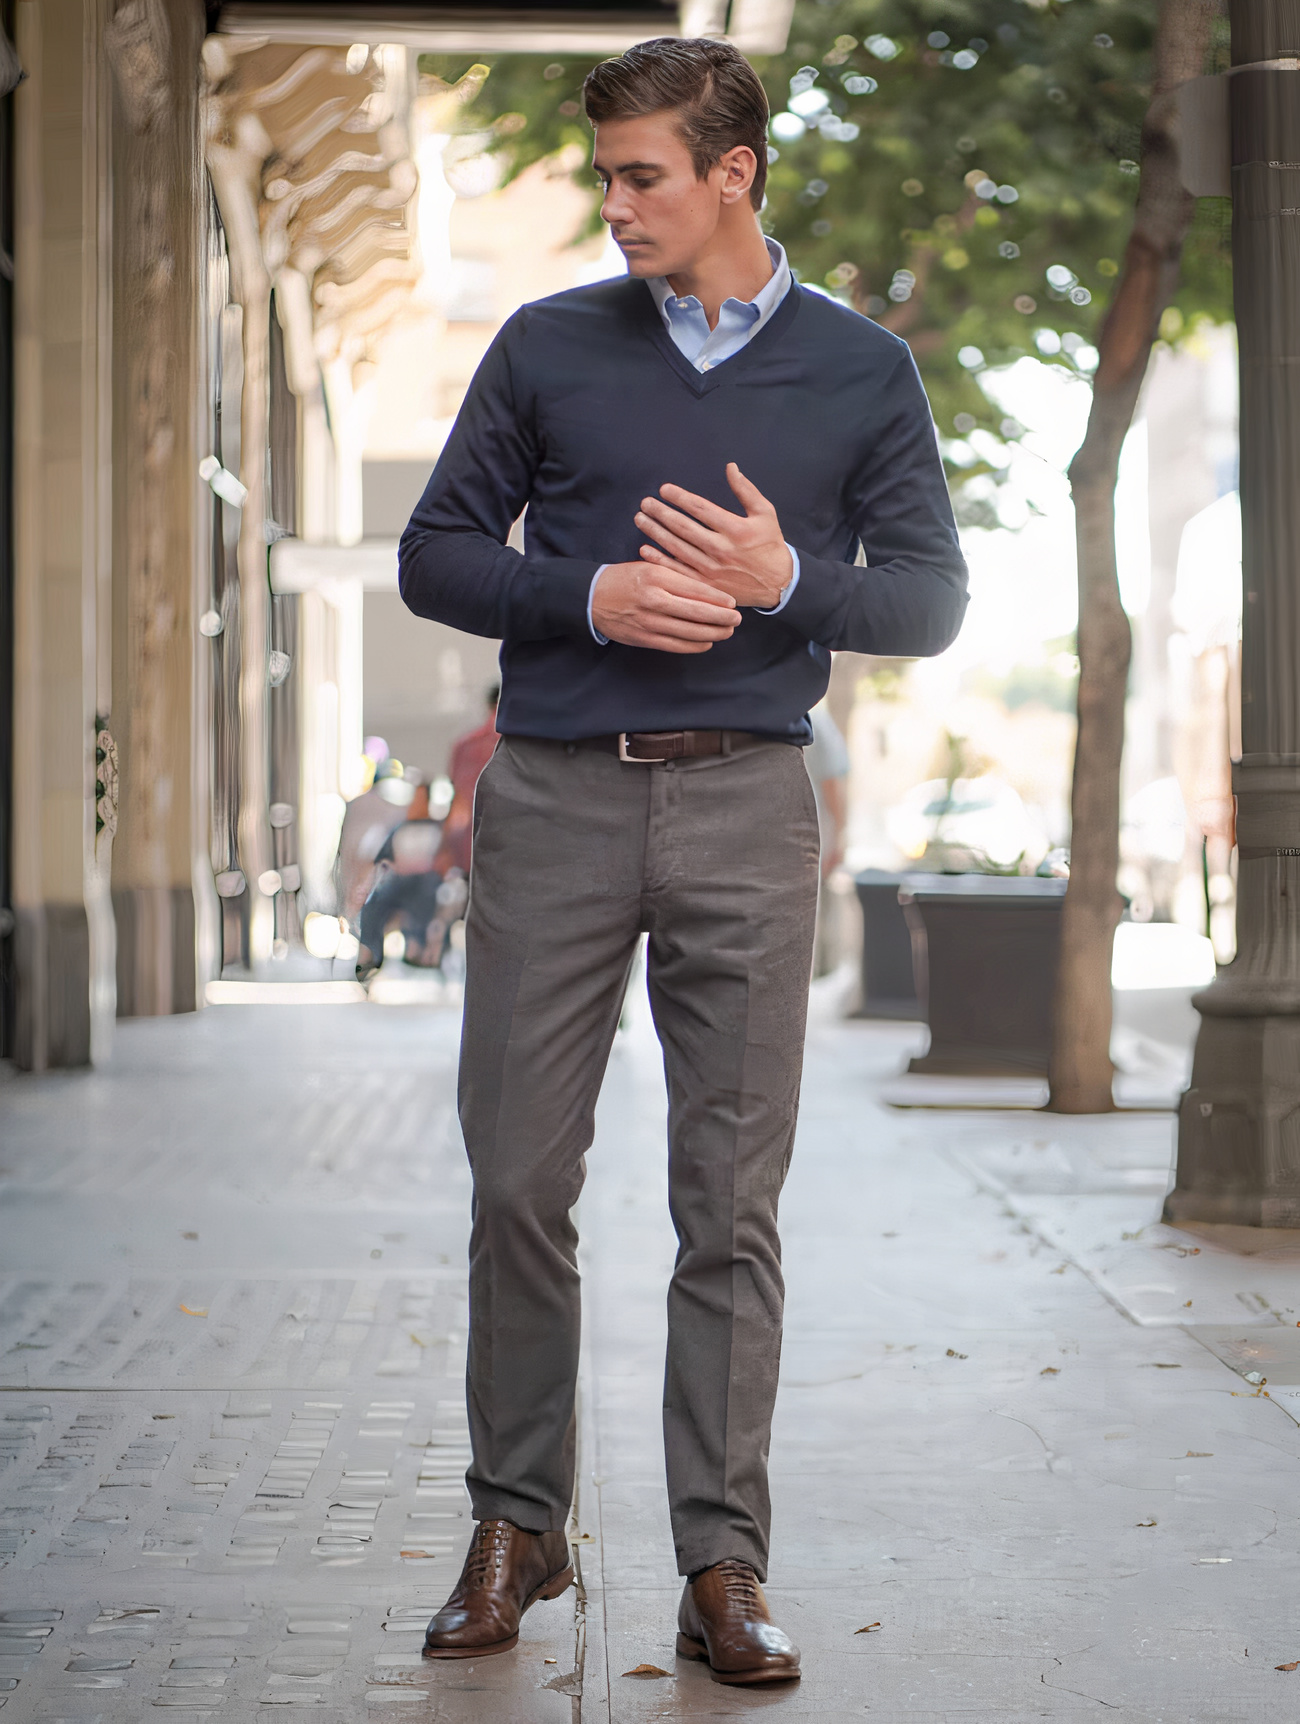 Navy sweater, blue shirt, grey chinos, and brown Oxford shoes